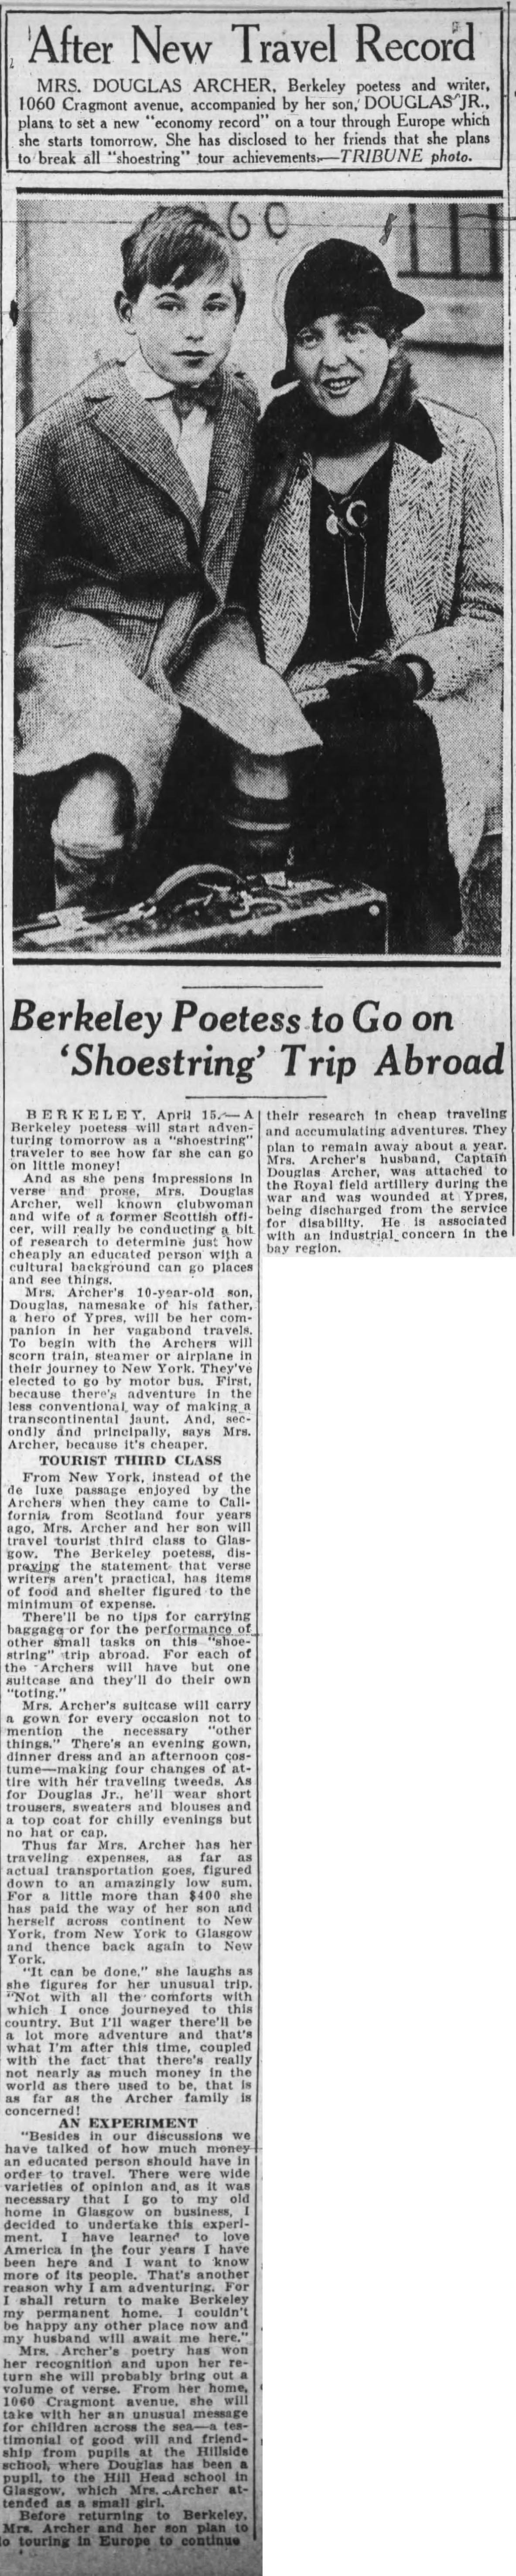 Taken in April 1931 and sourced from Shoestring trip article.